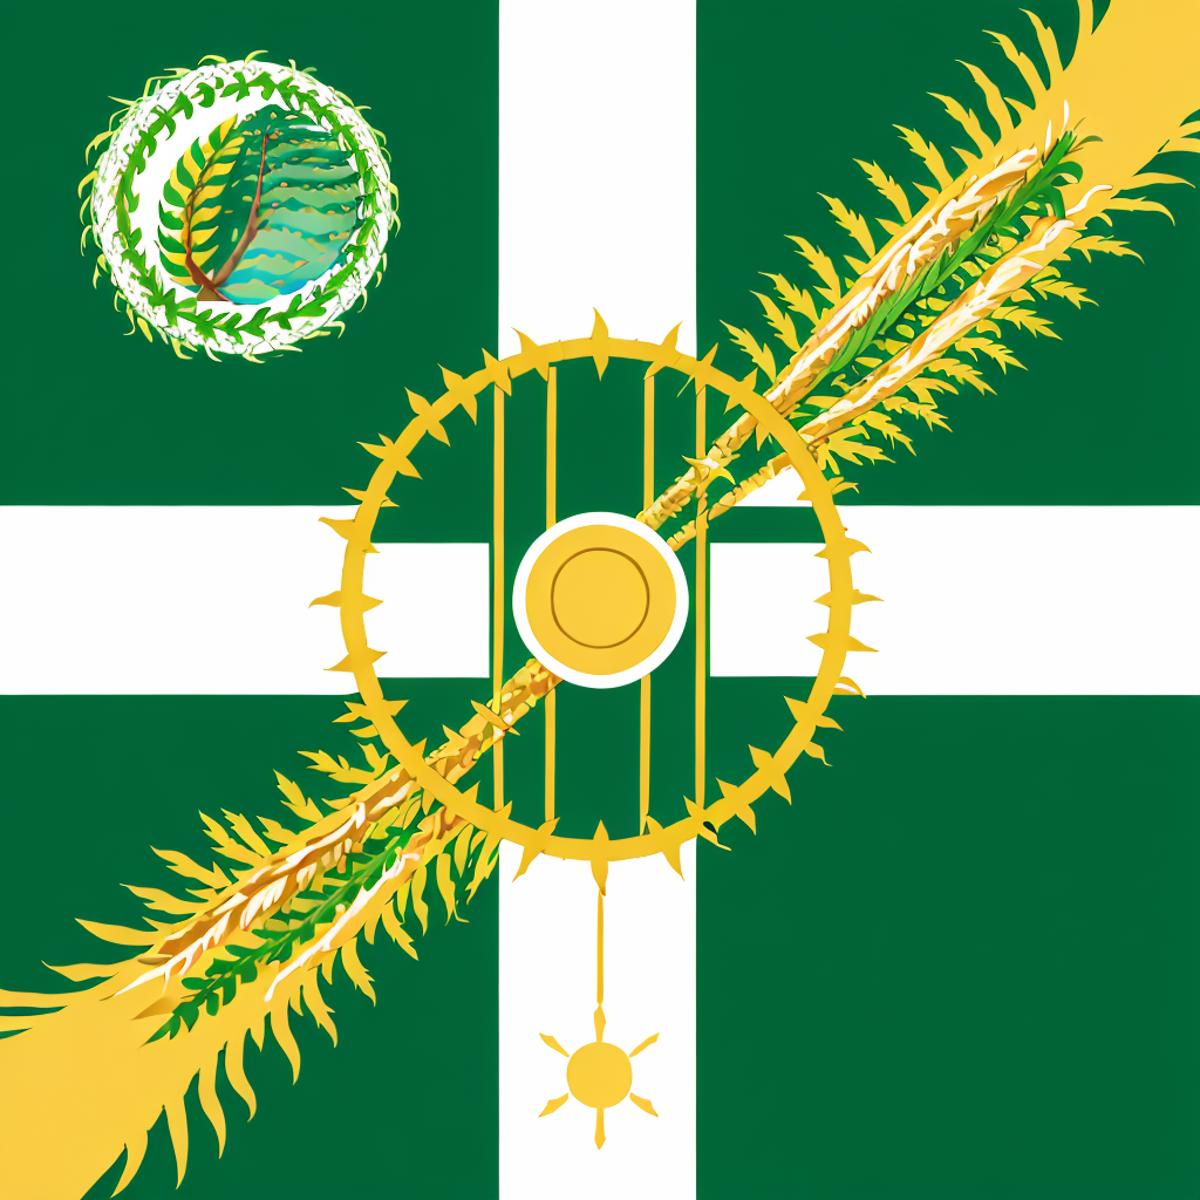 FlagMaker image by Ceranos